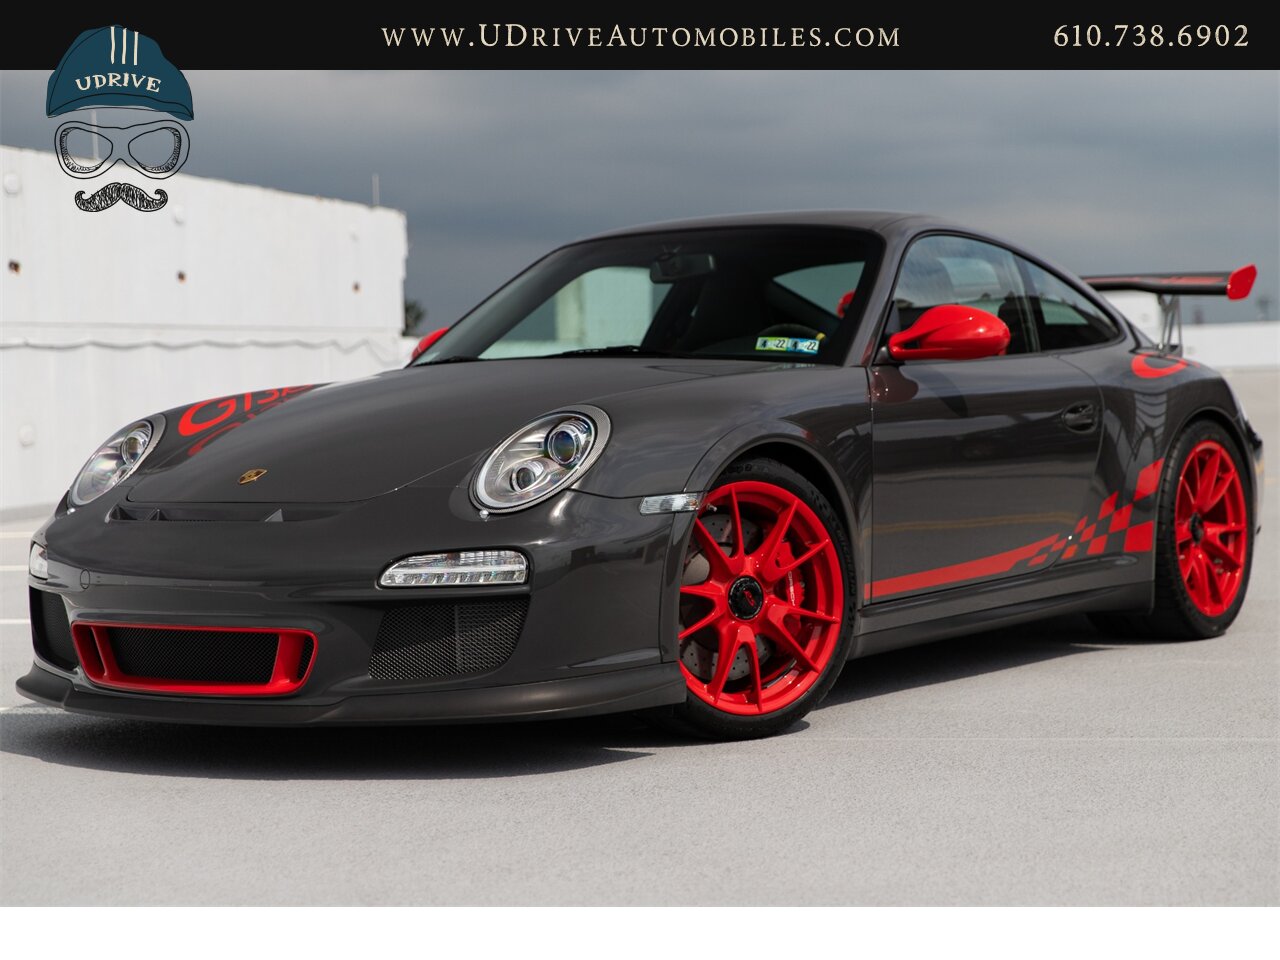 2010 Porsche 911 GT3 RS 1k Miles Dev Red Stitching Throughout  Front Axle Lift Sport Chrono 997.2 - Photo 1 - West Chester, PA 19382